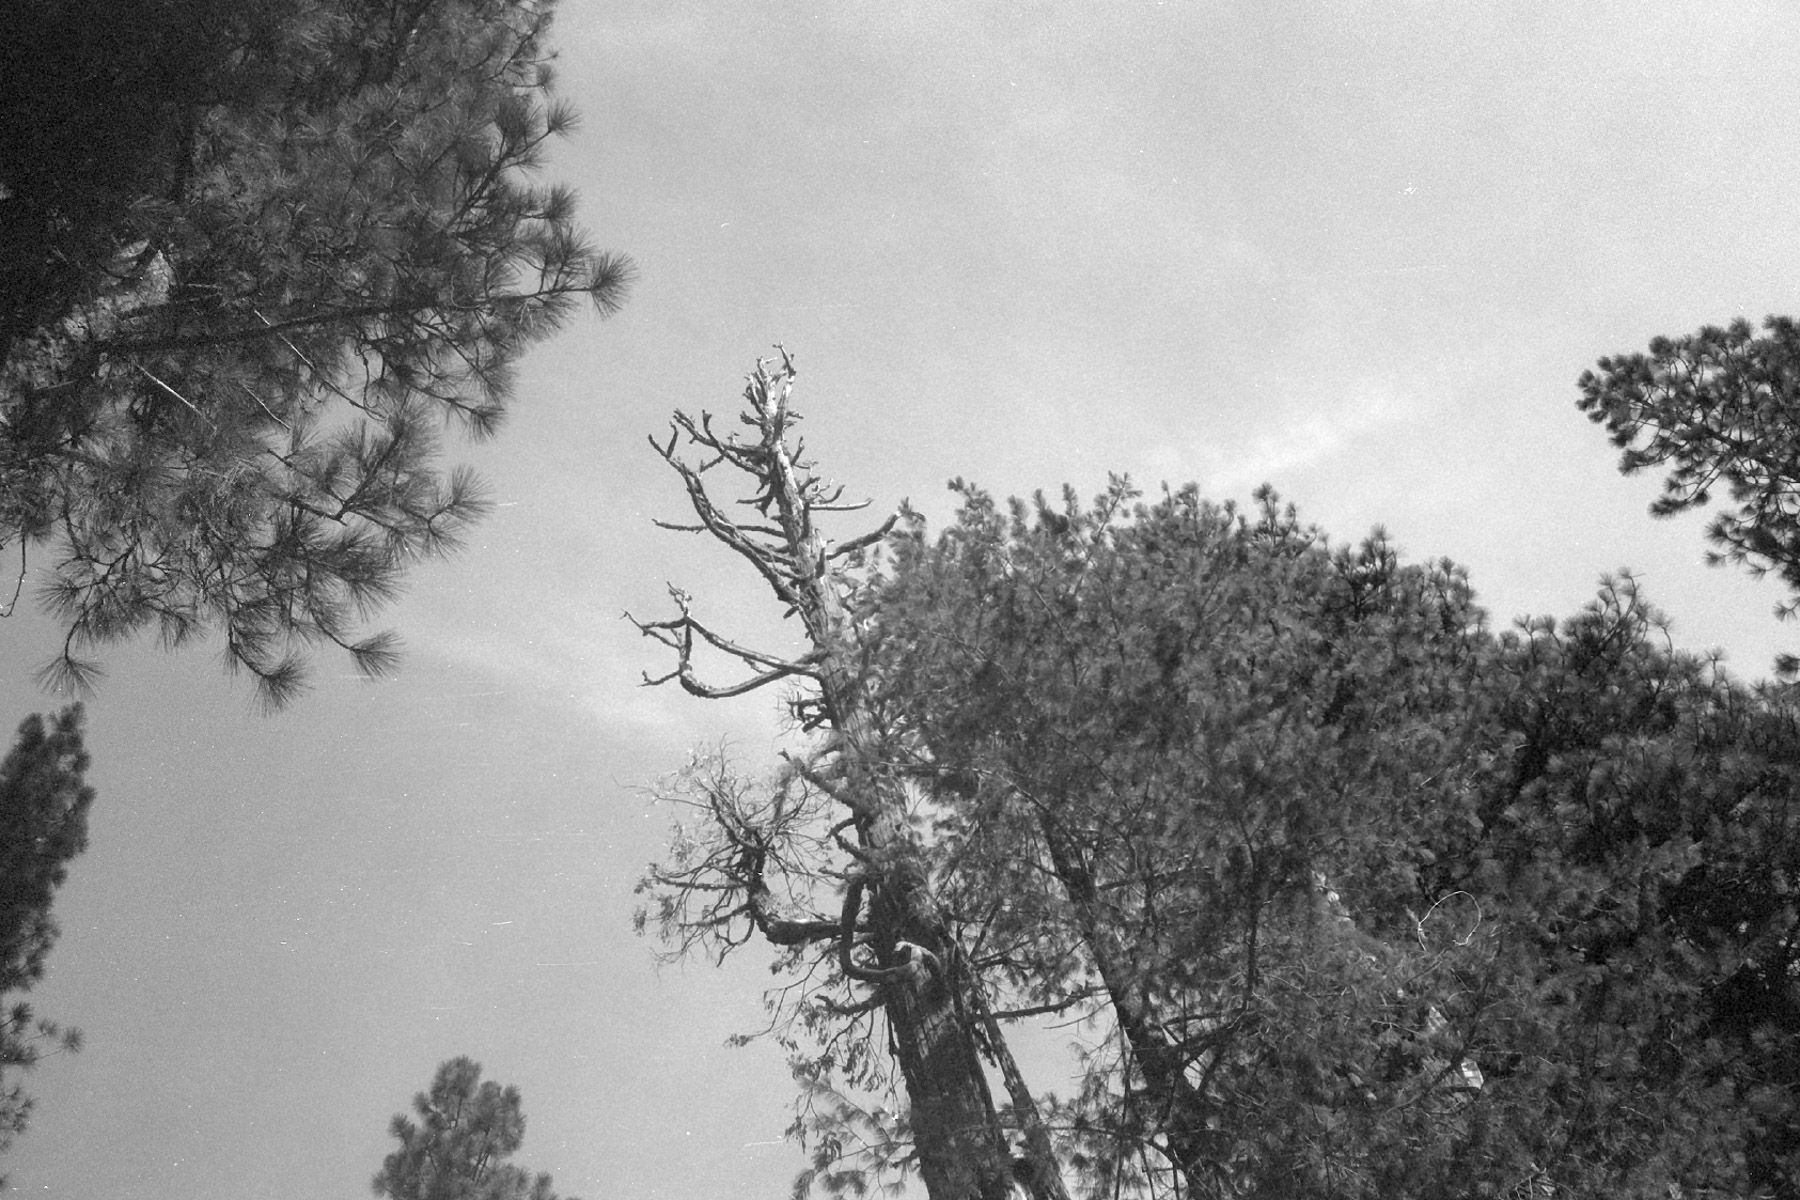 Black and white, angled toward the sky. Dead, sun-bleached tree reaching out amid the pines.